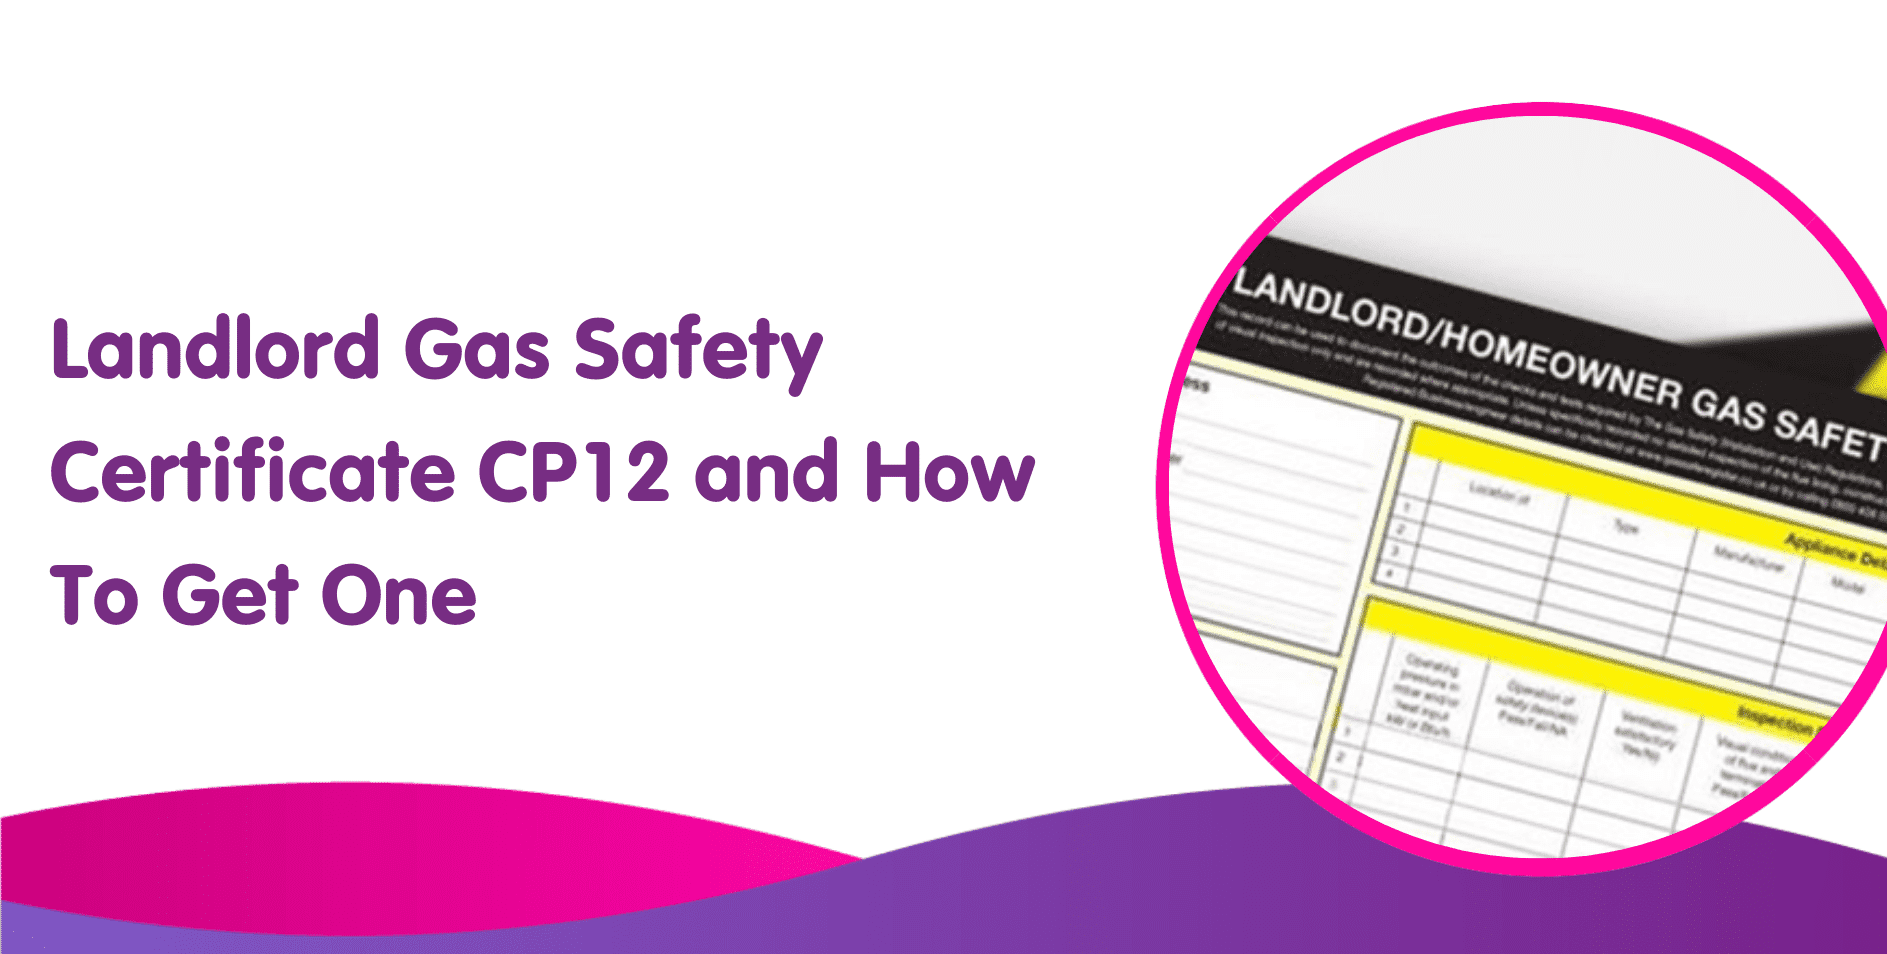 Landlord Gas Safety Certificate CP12 and How To Get One